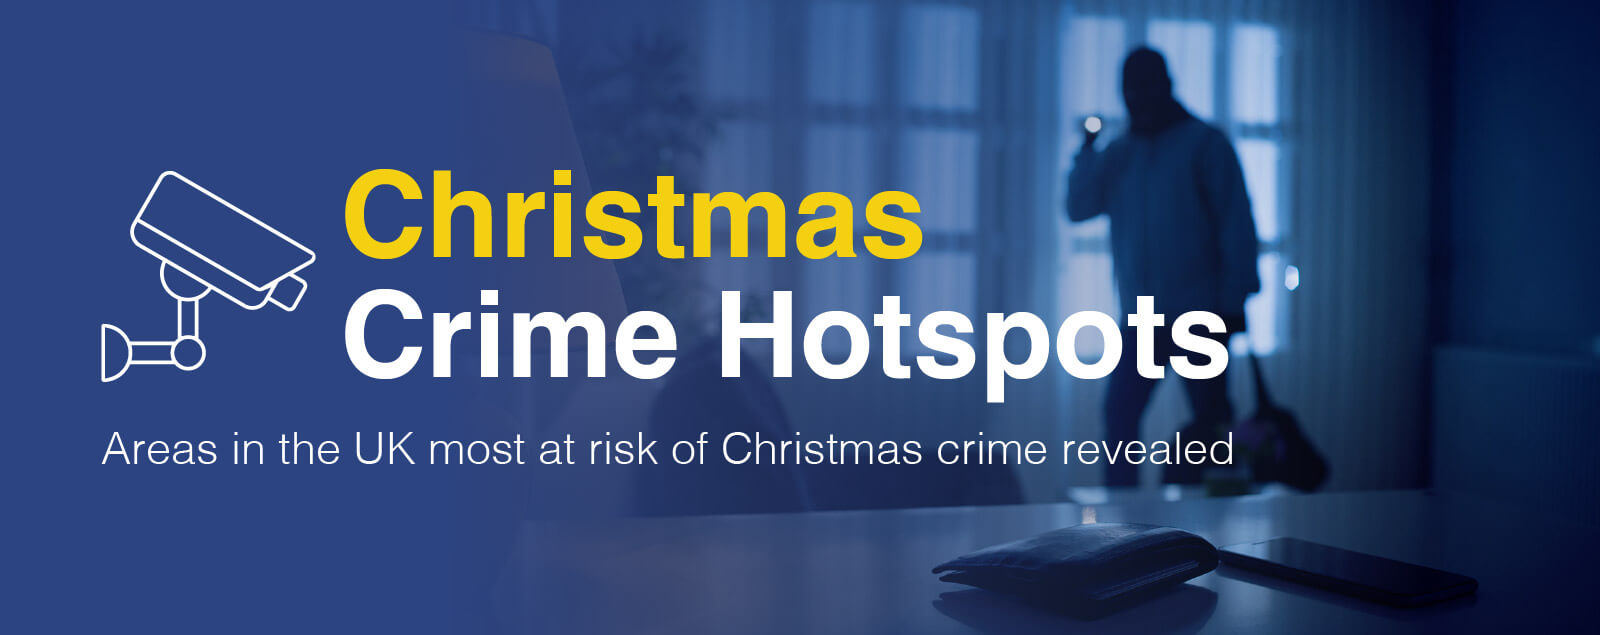 Christmas Crime Hotspots title with camera graphic on background of home with intruder